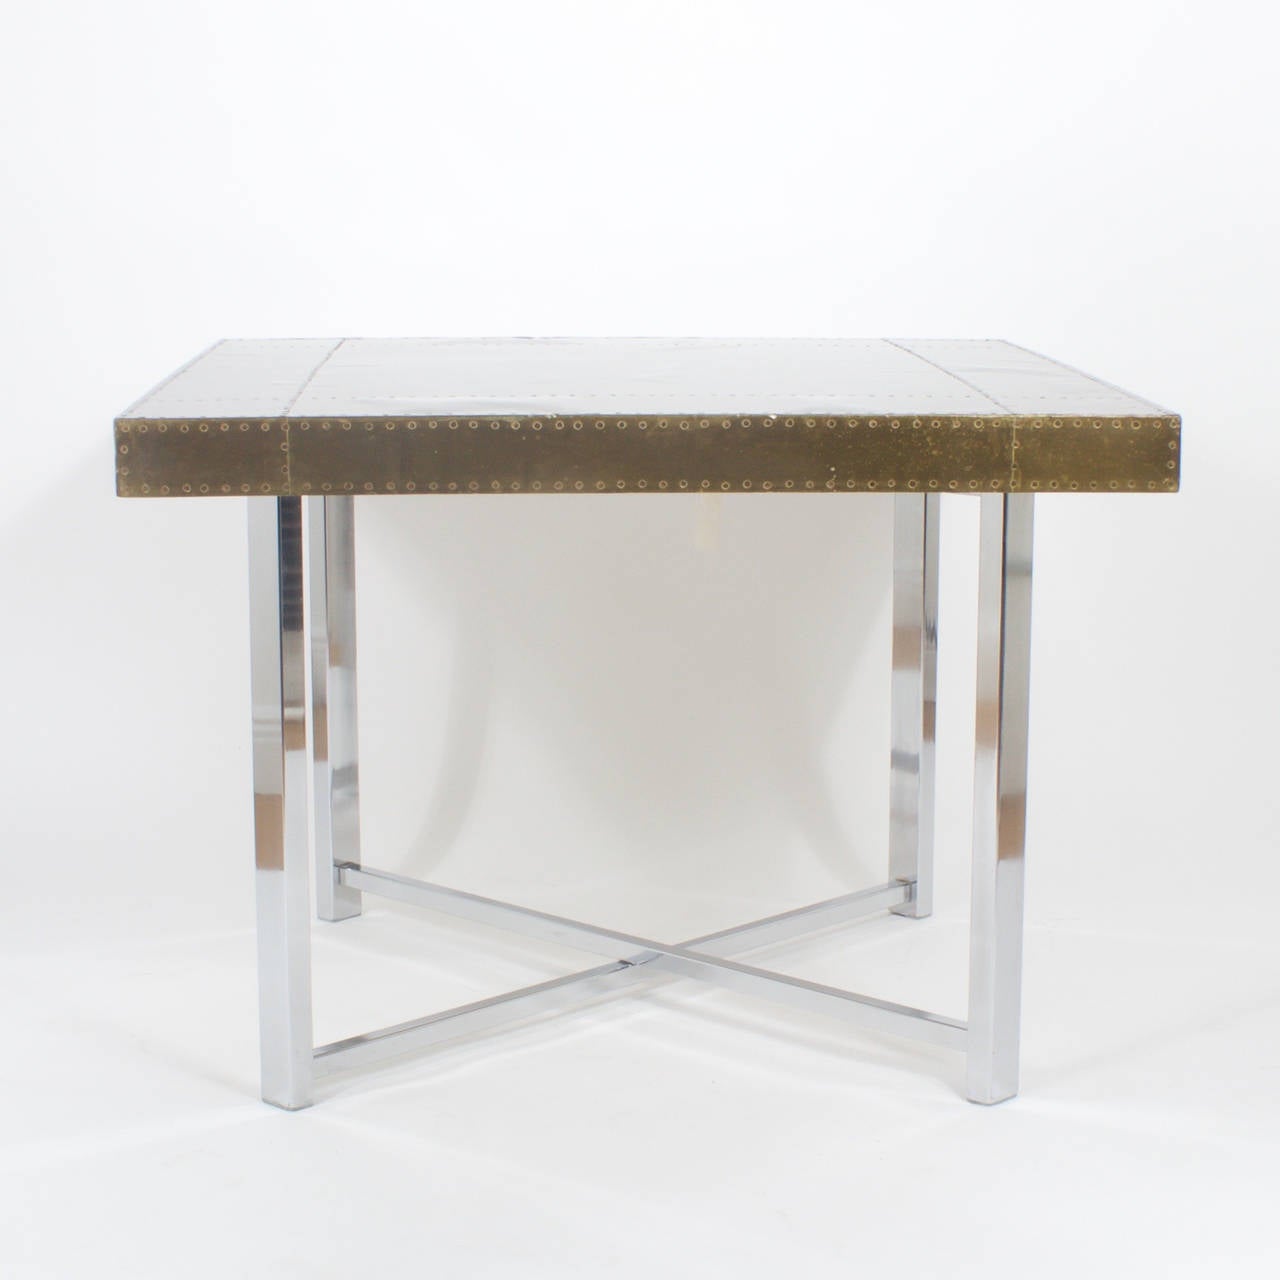 Midcentury Campaign style brass and chrome games or card table with a removable top and folding legs for easy storage. The square top has a sculptural element with patched brass sections riveted down in an Industrial way. Great combination of cool